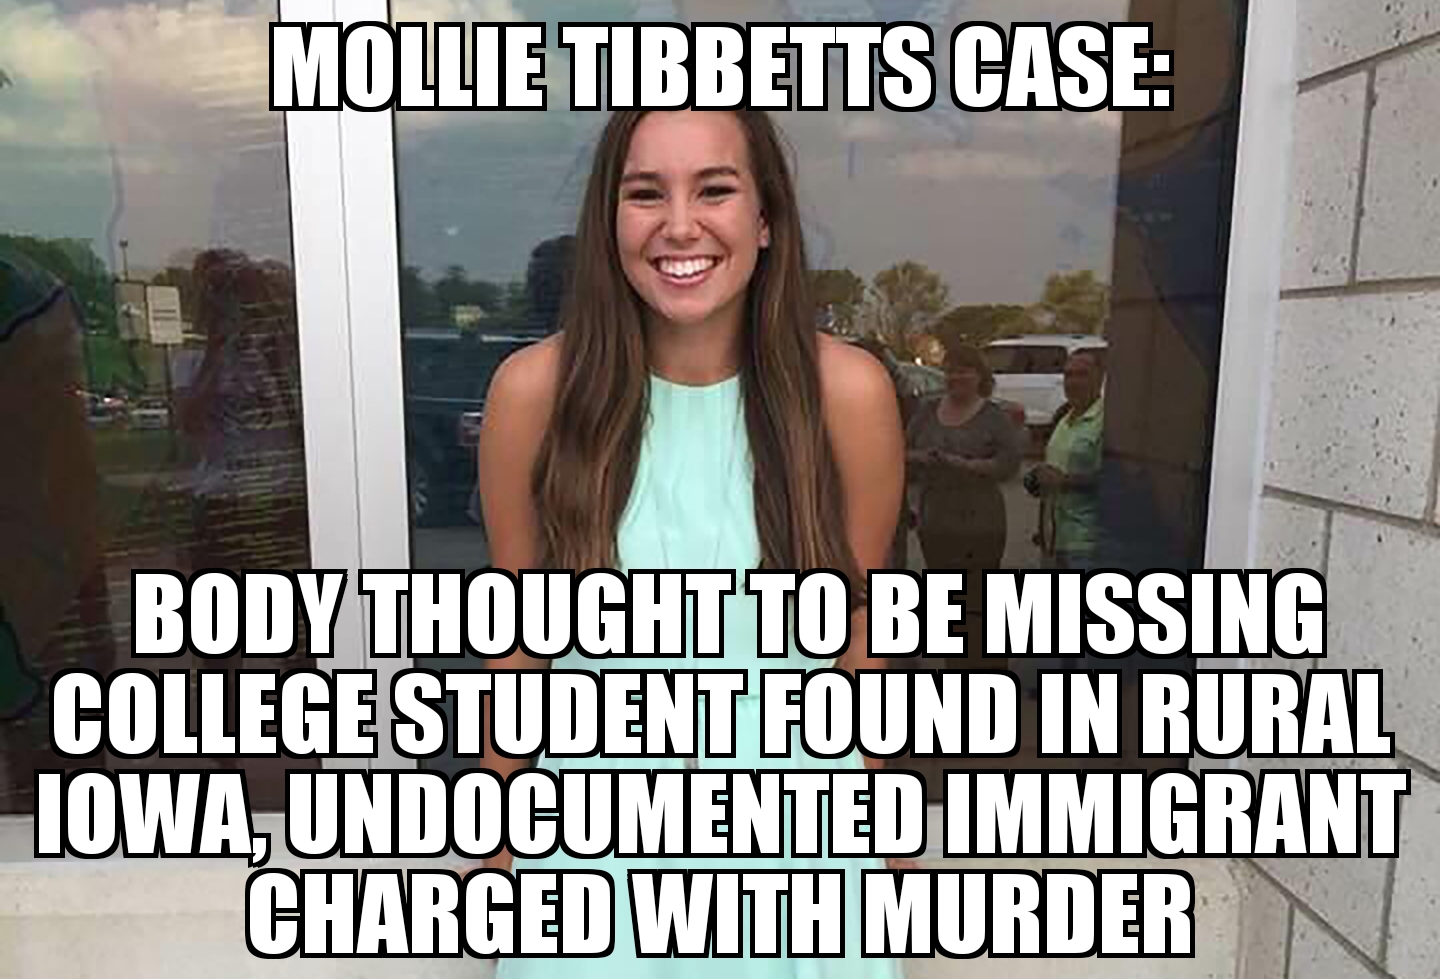 Undocumented immigrant charged with Mollie Tibbetts murder